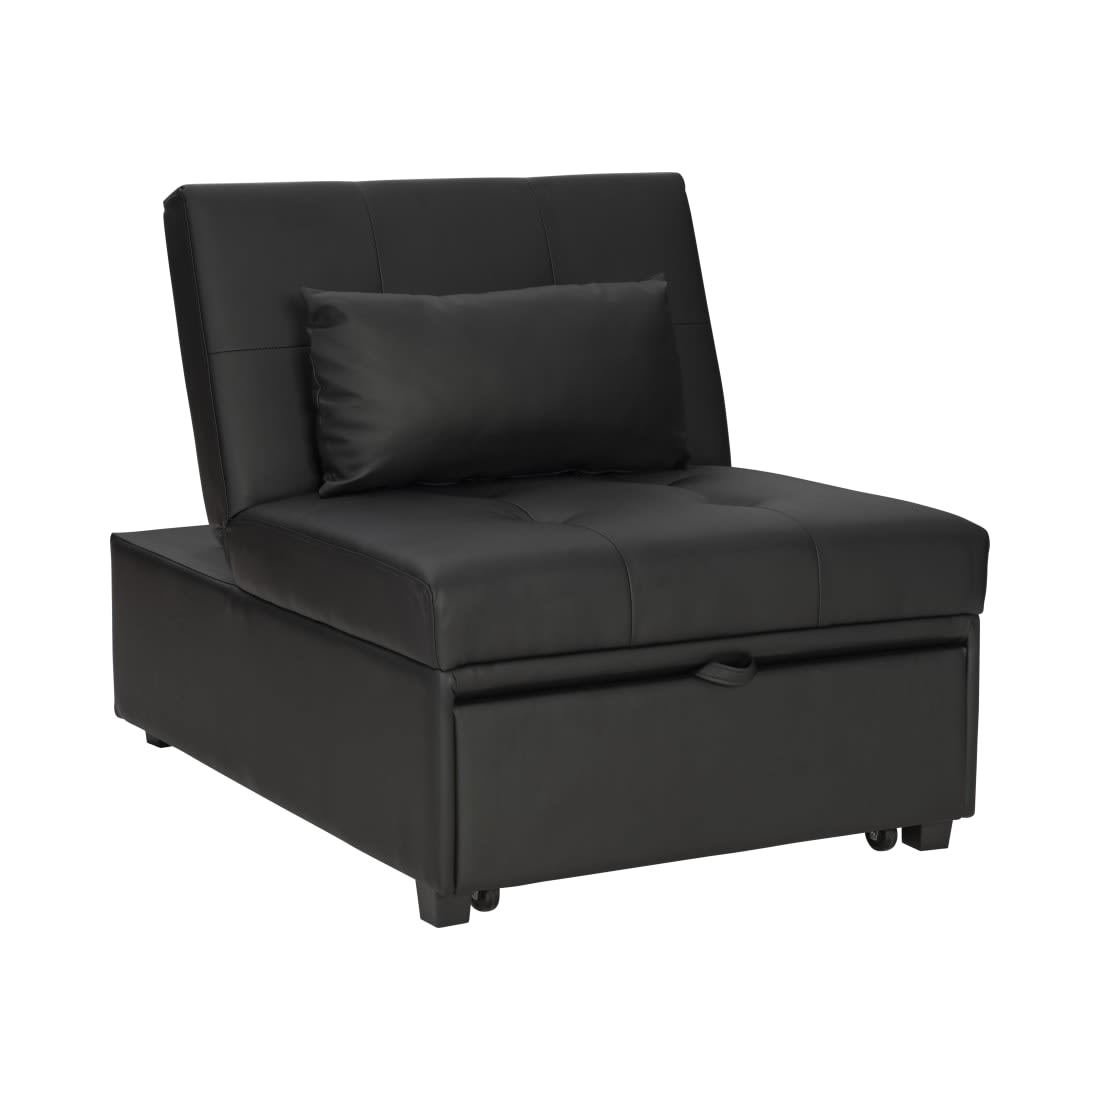 Black Faux Leather Sofa Bed, Faux Leather Loveseat Twin Sleeper Sofa